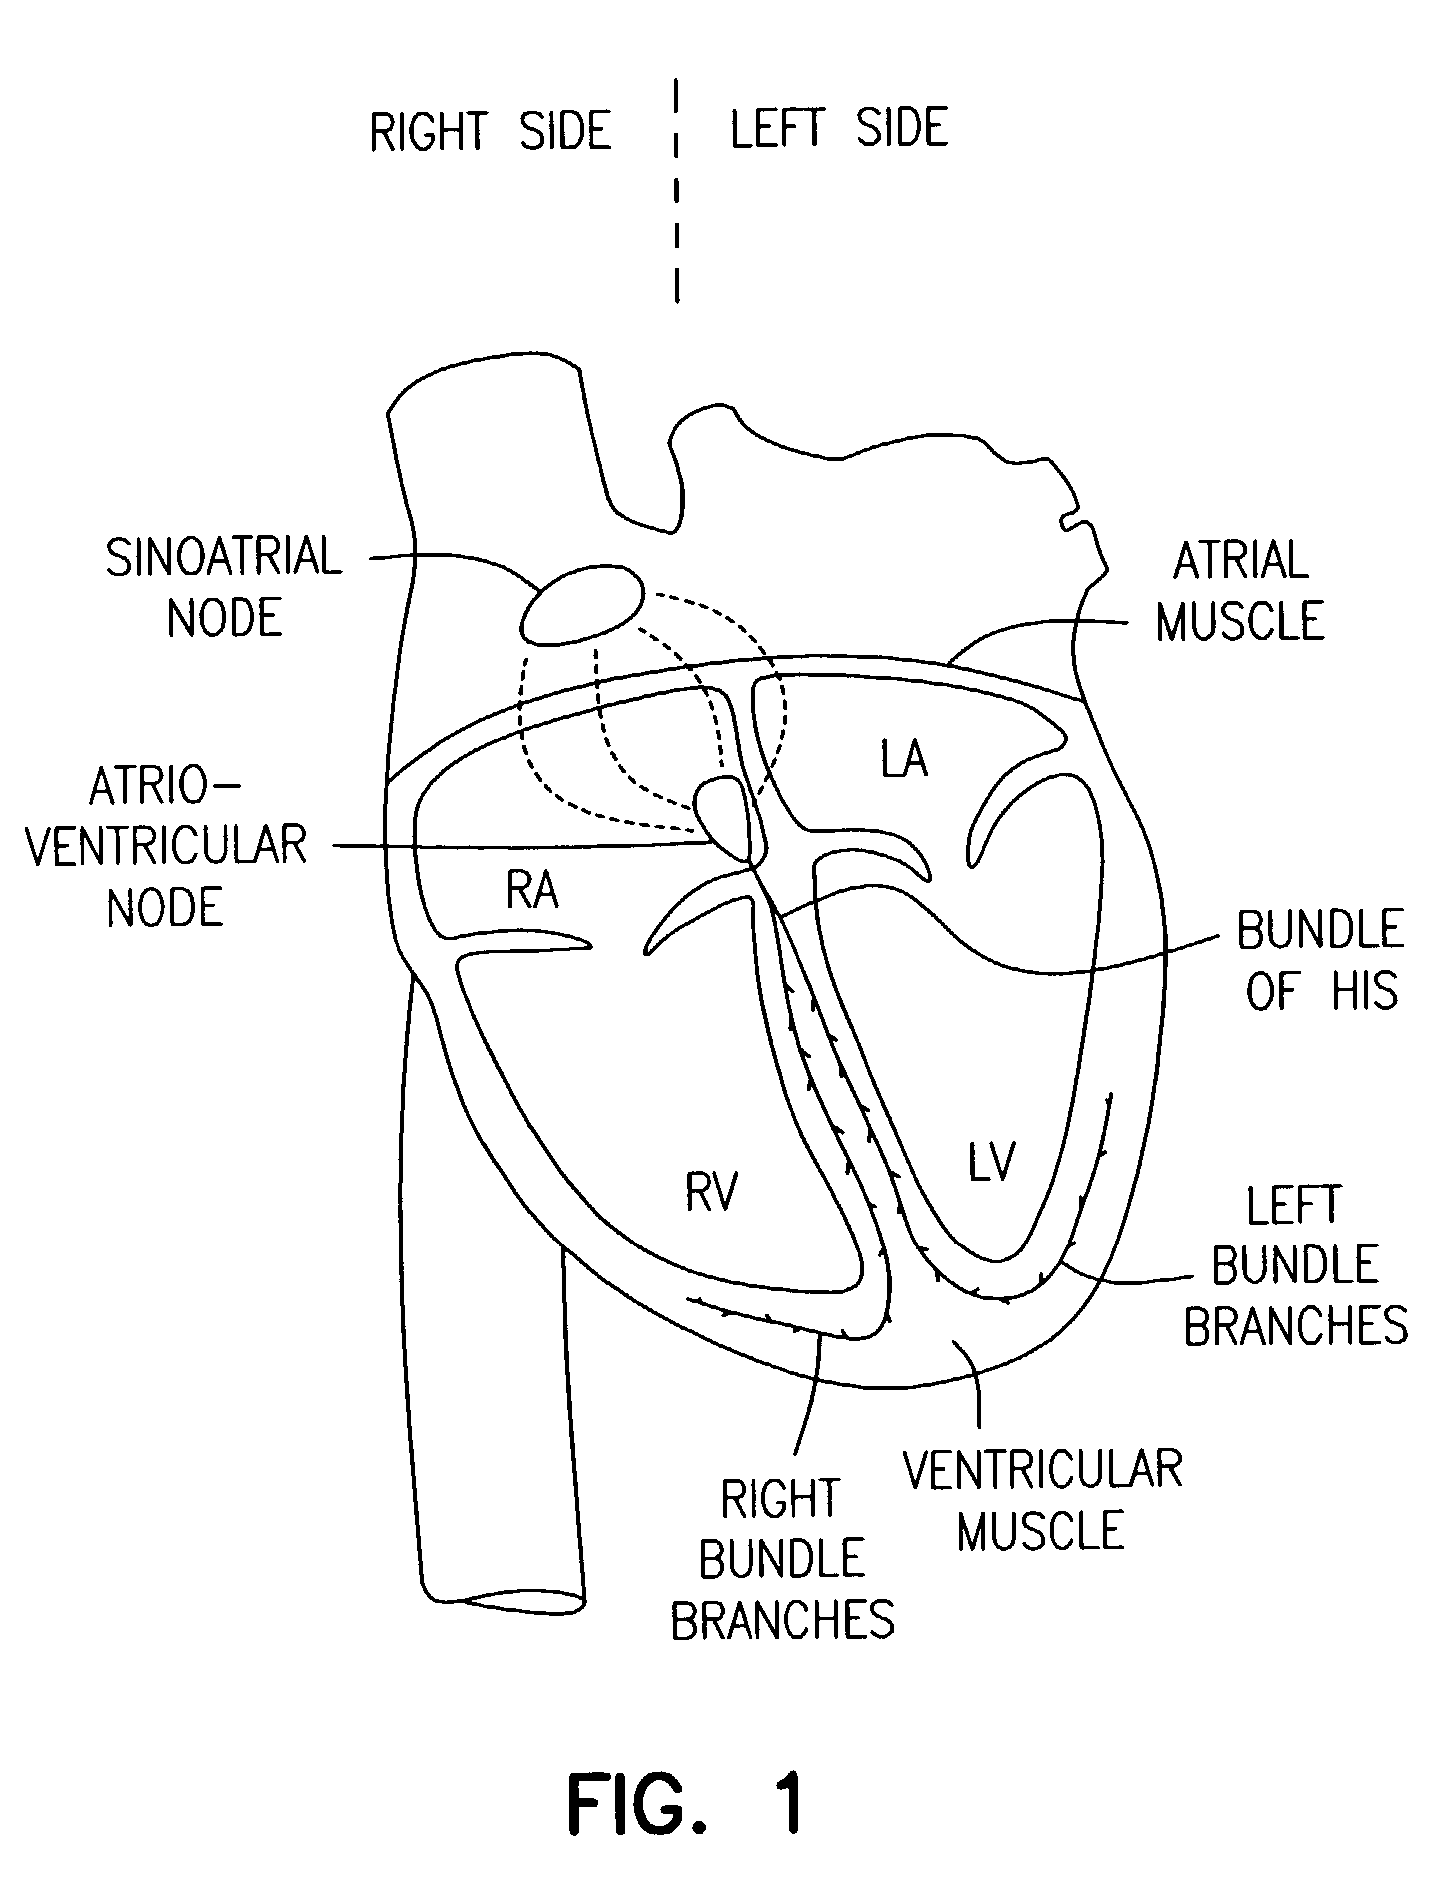 Method and apparatus for optimizing stroke volume during DDD resynchronization therapy using adjustable atrio-ventricular delays